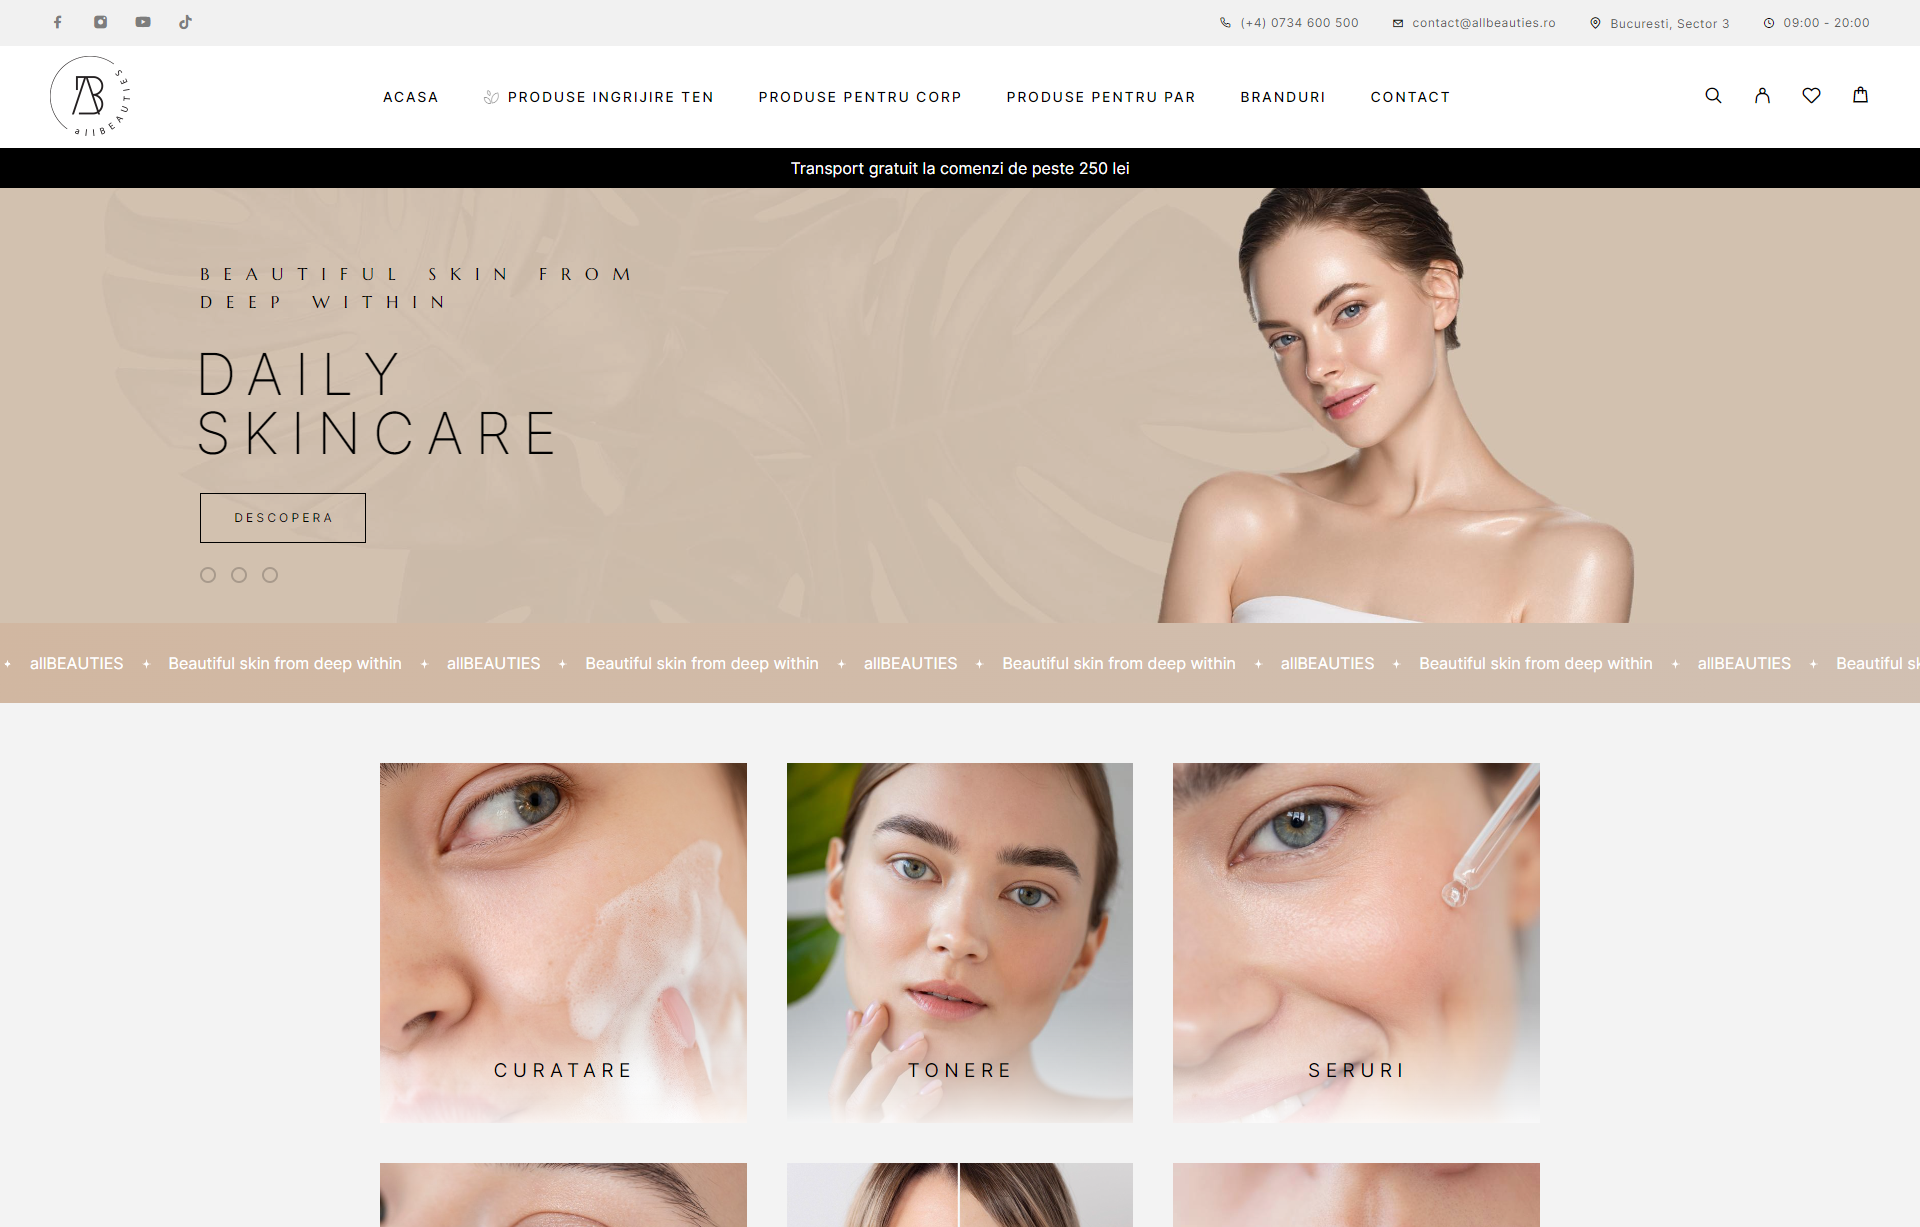 Building an Online Presence for a Cosmetic Brand